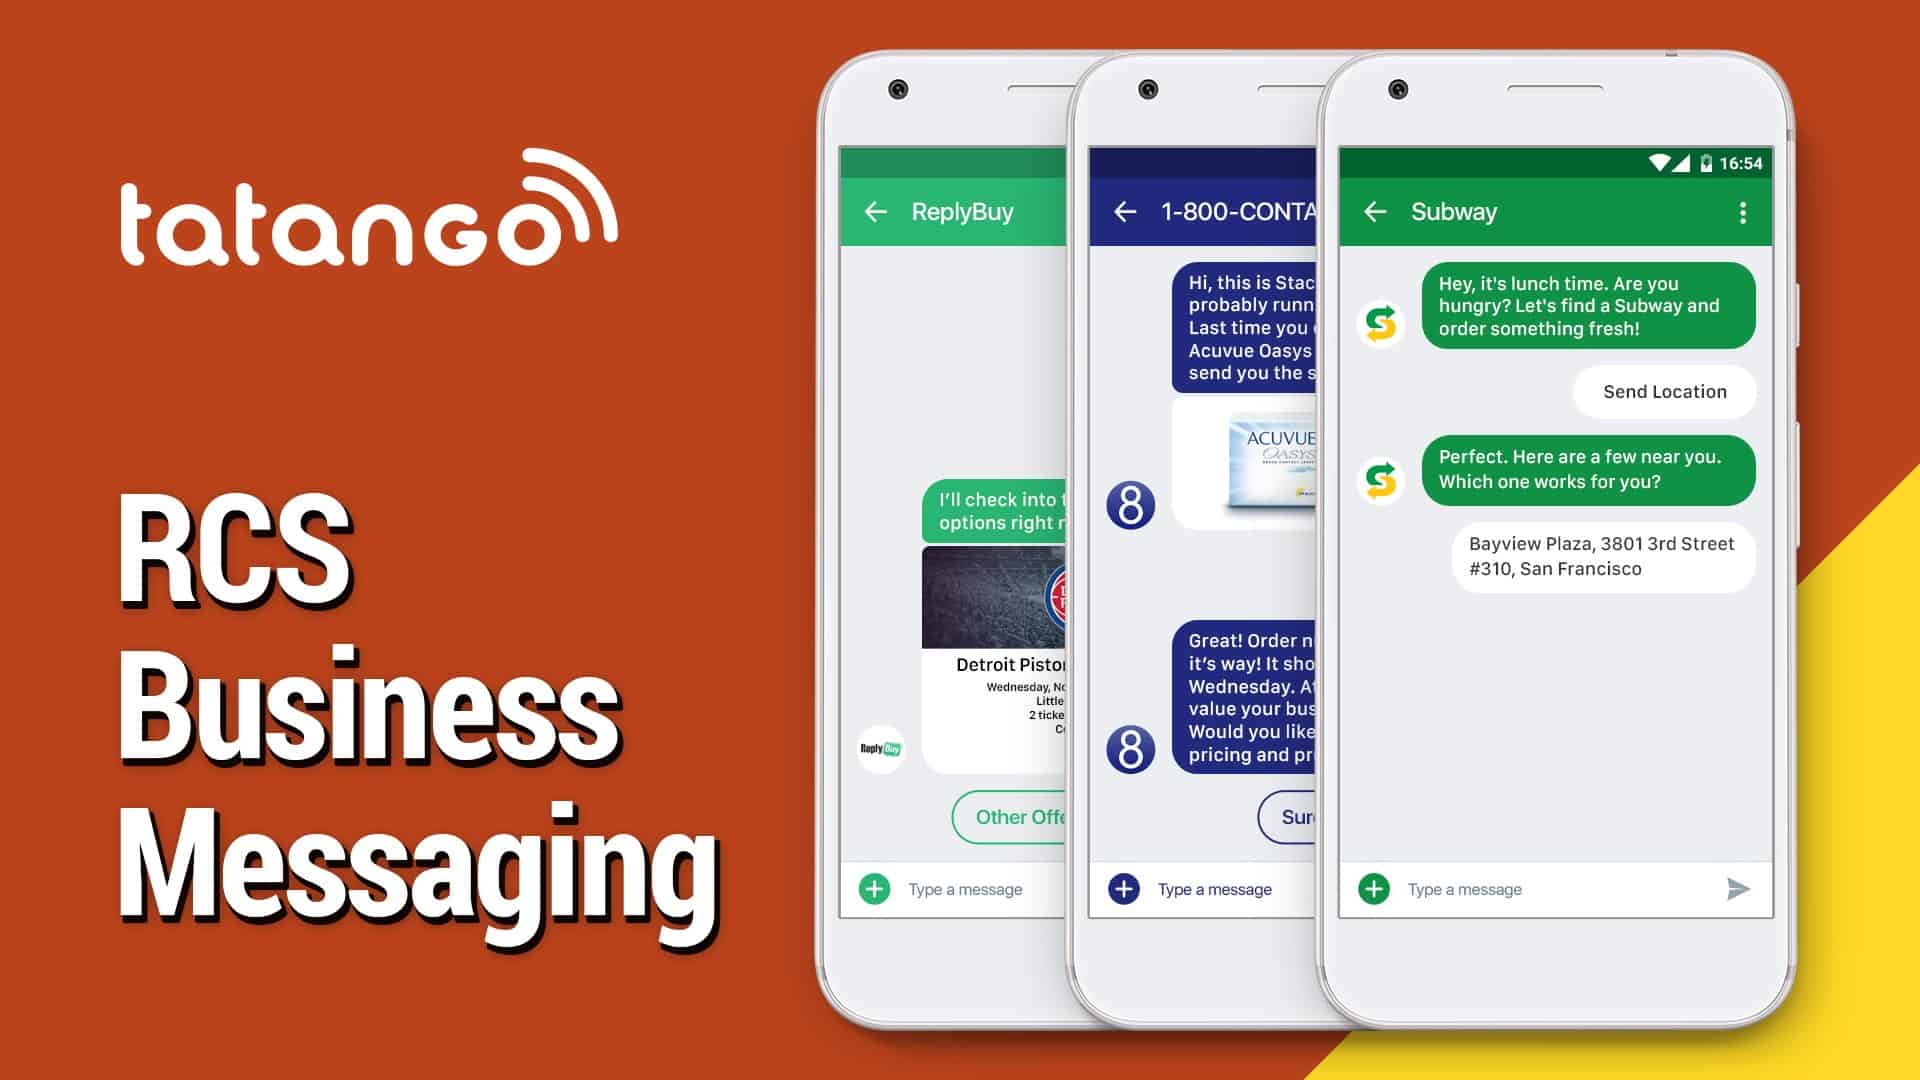 This picture has the words "Tatango" and "RCS business messaging" written on it, and it shows three mobile phones displaying RCS messages.